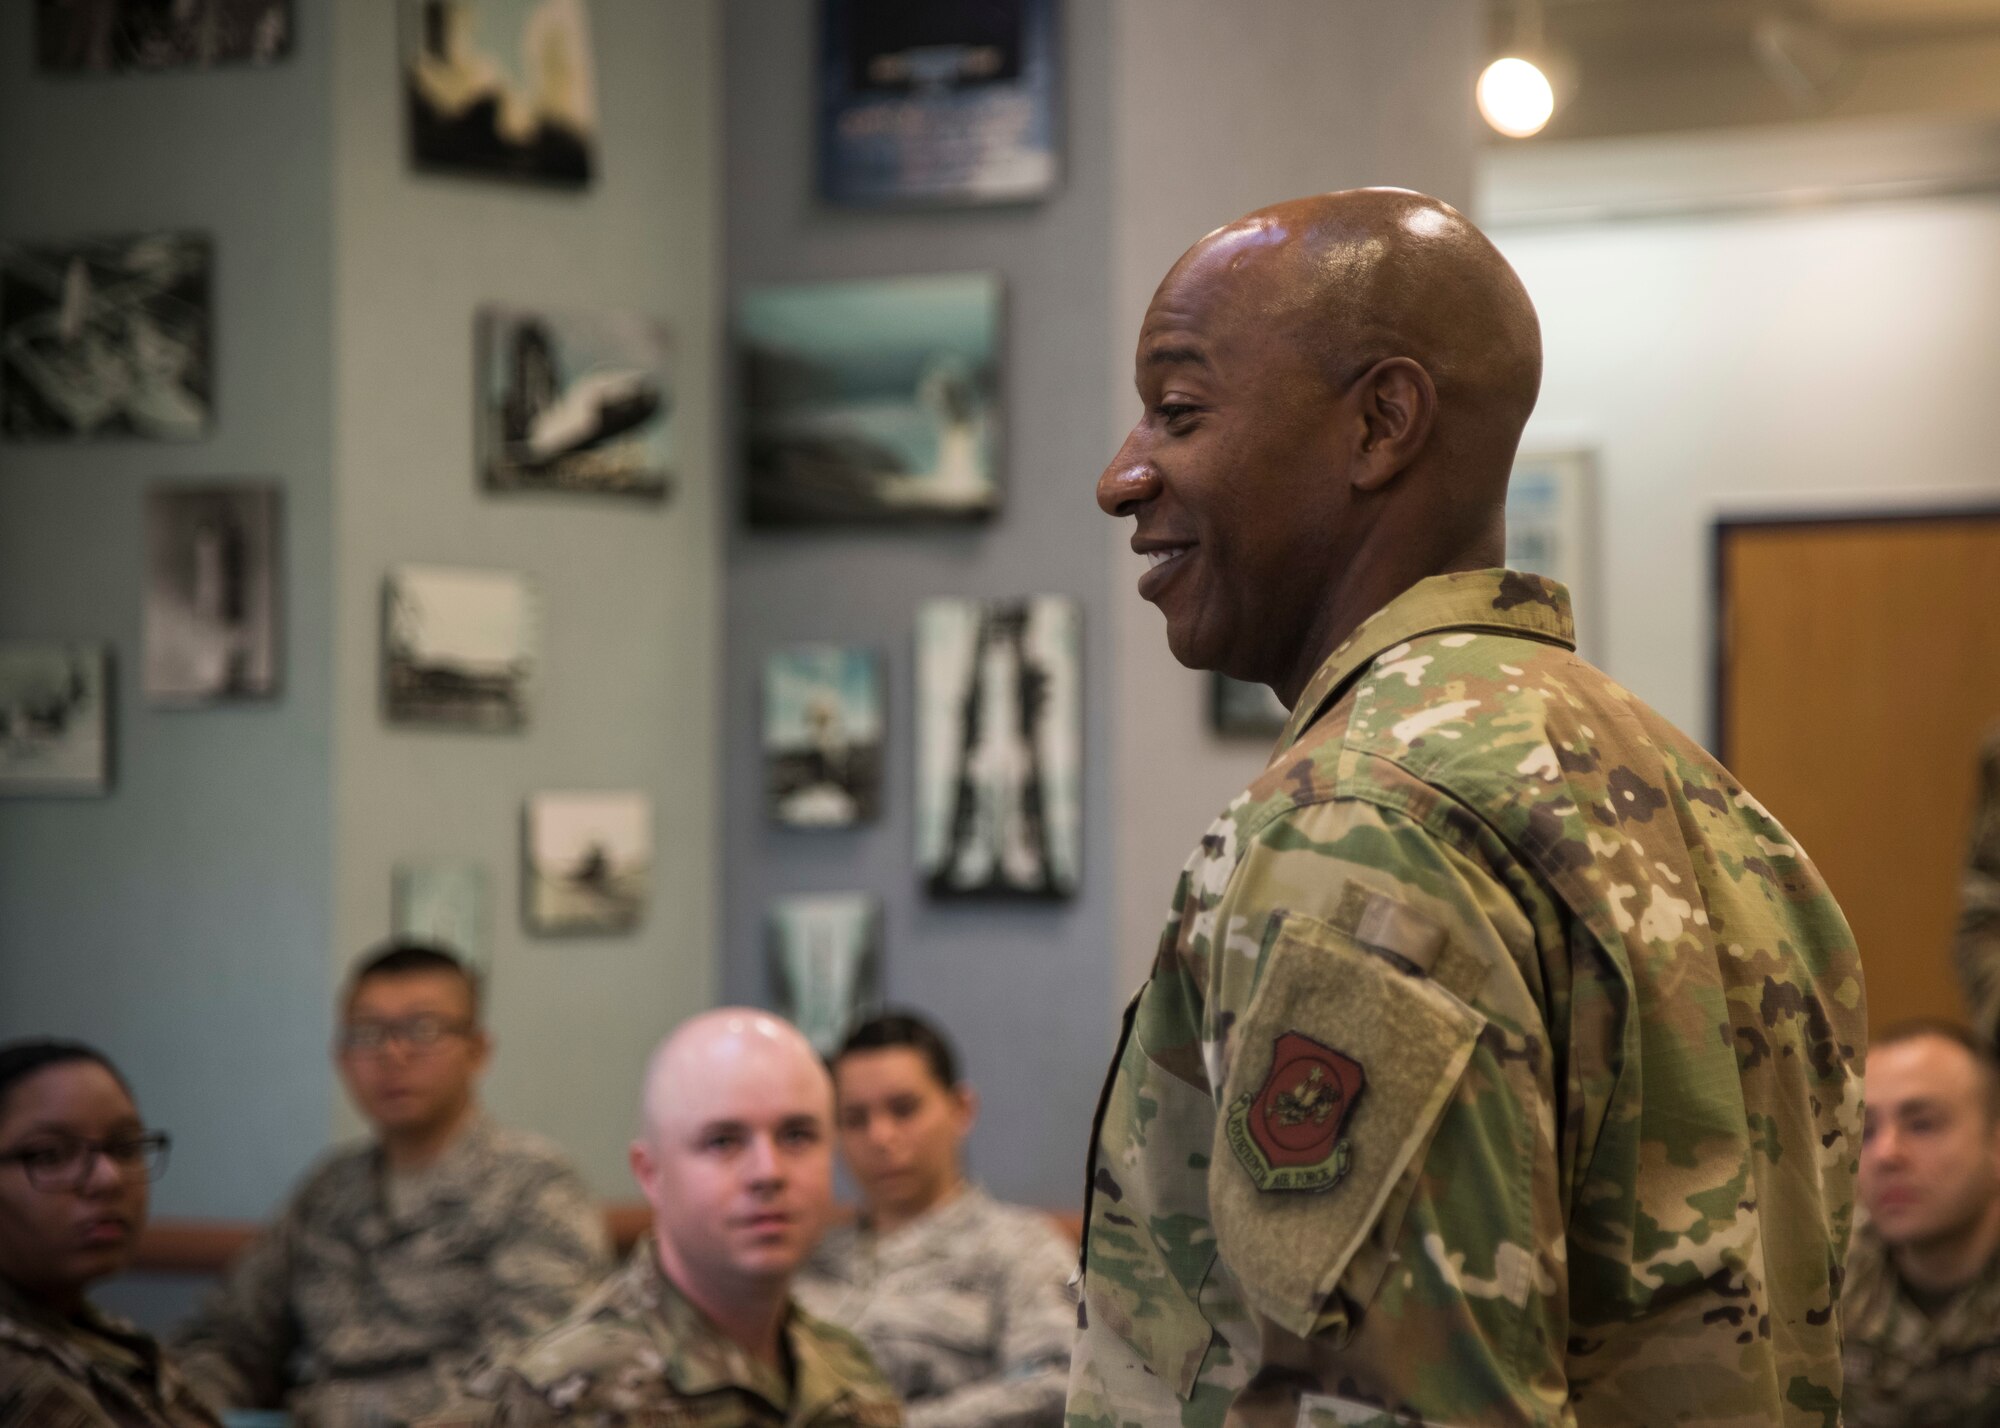 Chief Master Sergeant of the Air Force Kaleth O. Wright interacts with Airmen at Breakers Dining Facility, Sept. 25, 2019 at Vandenberg Air Force Base, Calif. Wright began his visit with a breakfast where he met Airmen to learn their personal stories and their outlooks on the Air Force. (U.S. Air Force photo by Airman 1st Class Aubree Milks